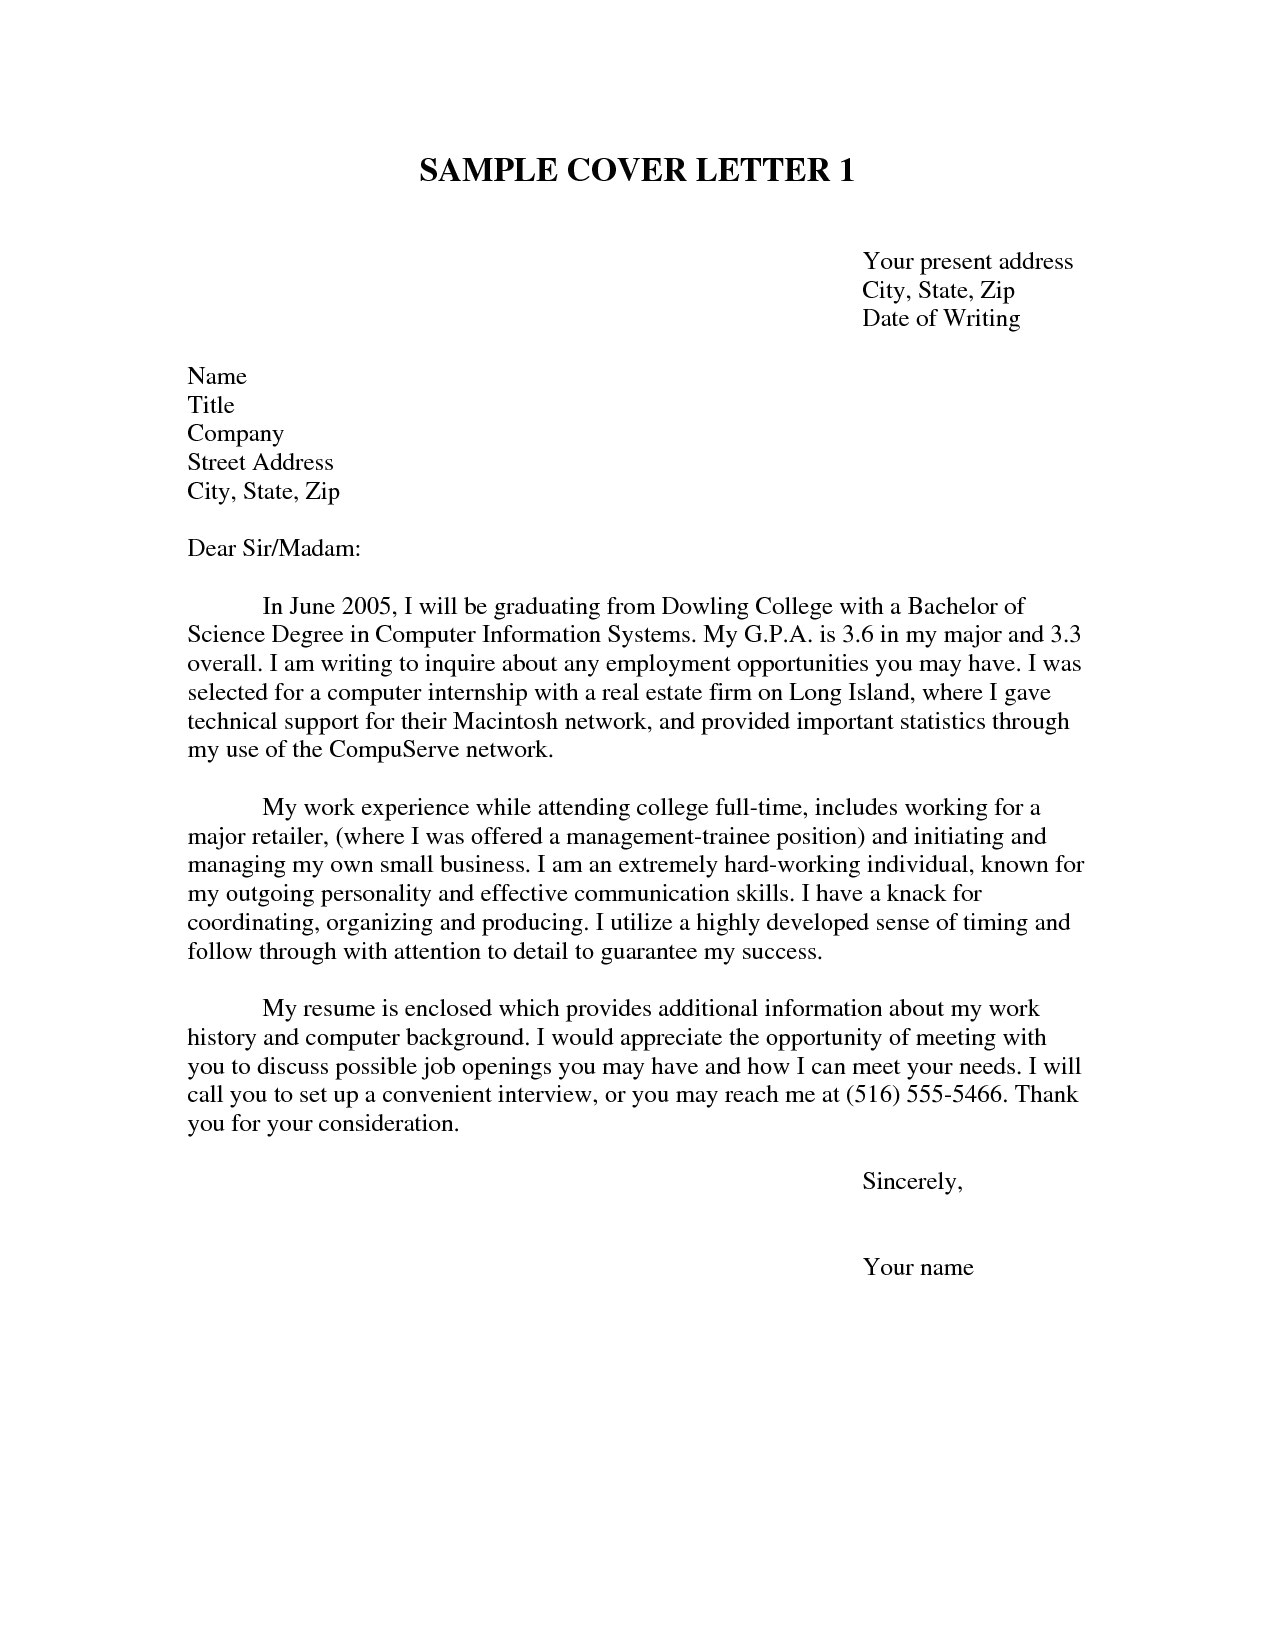 How to Start Out A Cover Letter Starting Off A Cover Letter the Letter Sample